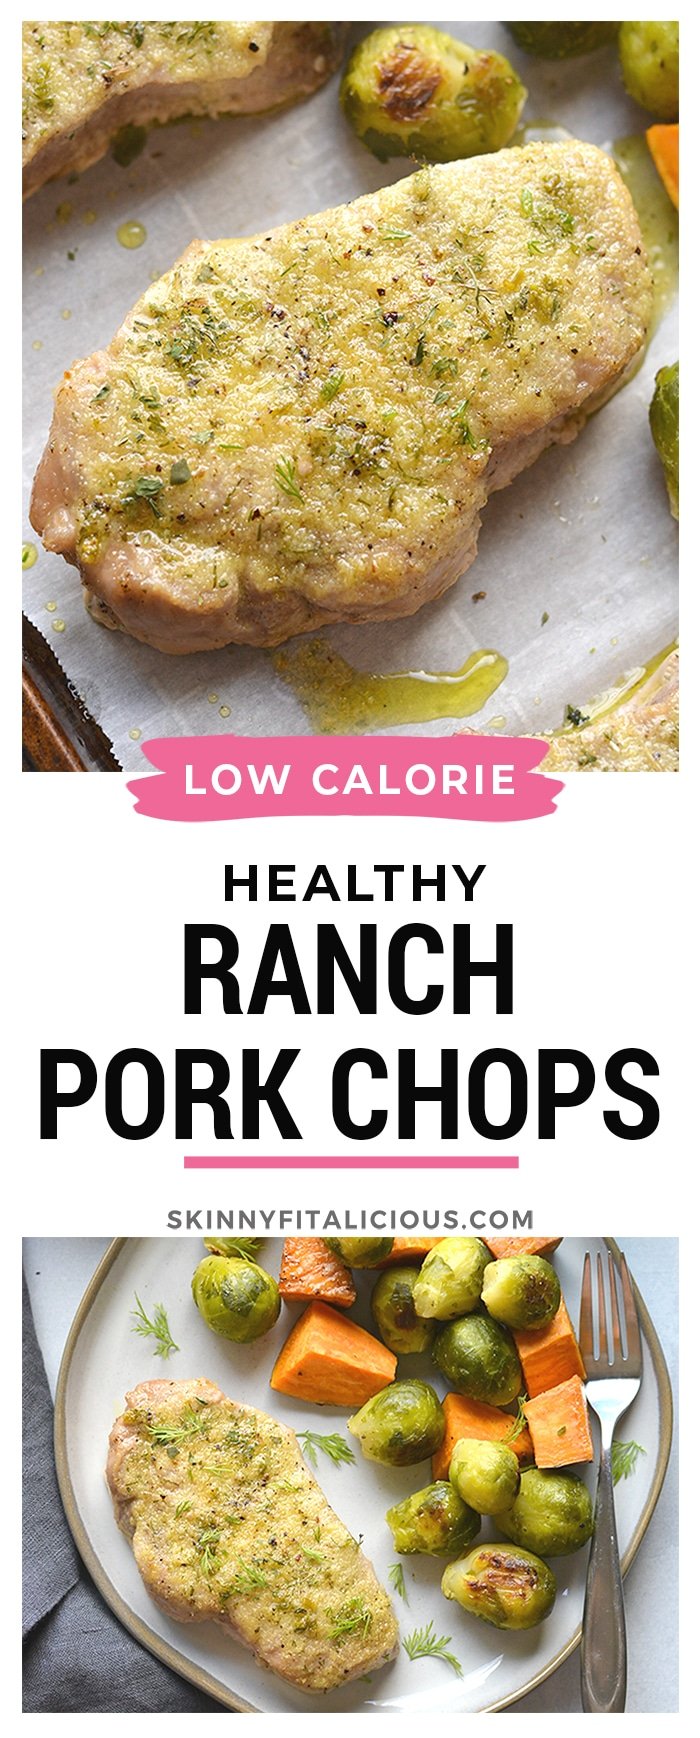 Healthy Ranch Pork Chops baked on a sheet pan with veggies for an easy, low calorie dinner packed with flavor! Easy to make homemade ranch seasoning and easy cleanup too. Low Calorie + Gluten Free + Dairy Free + Paleo